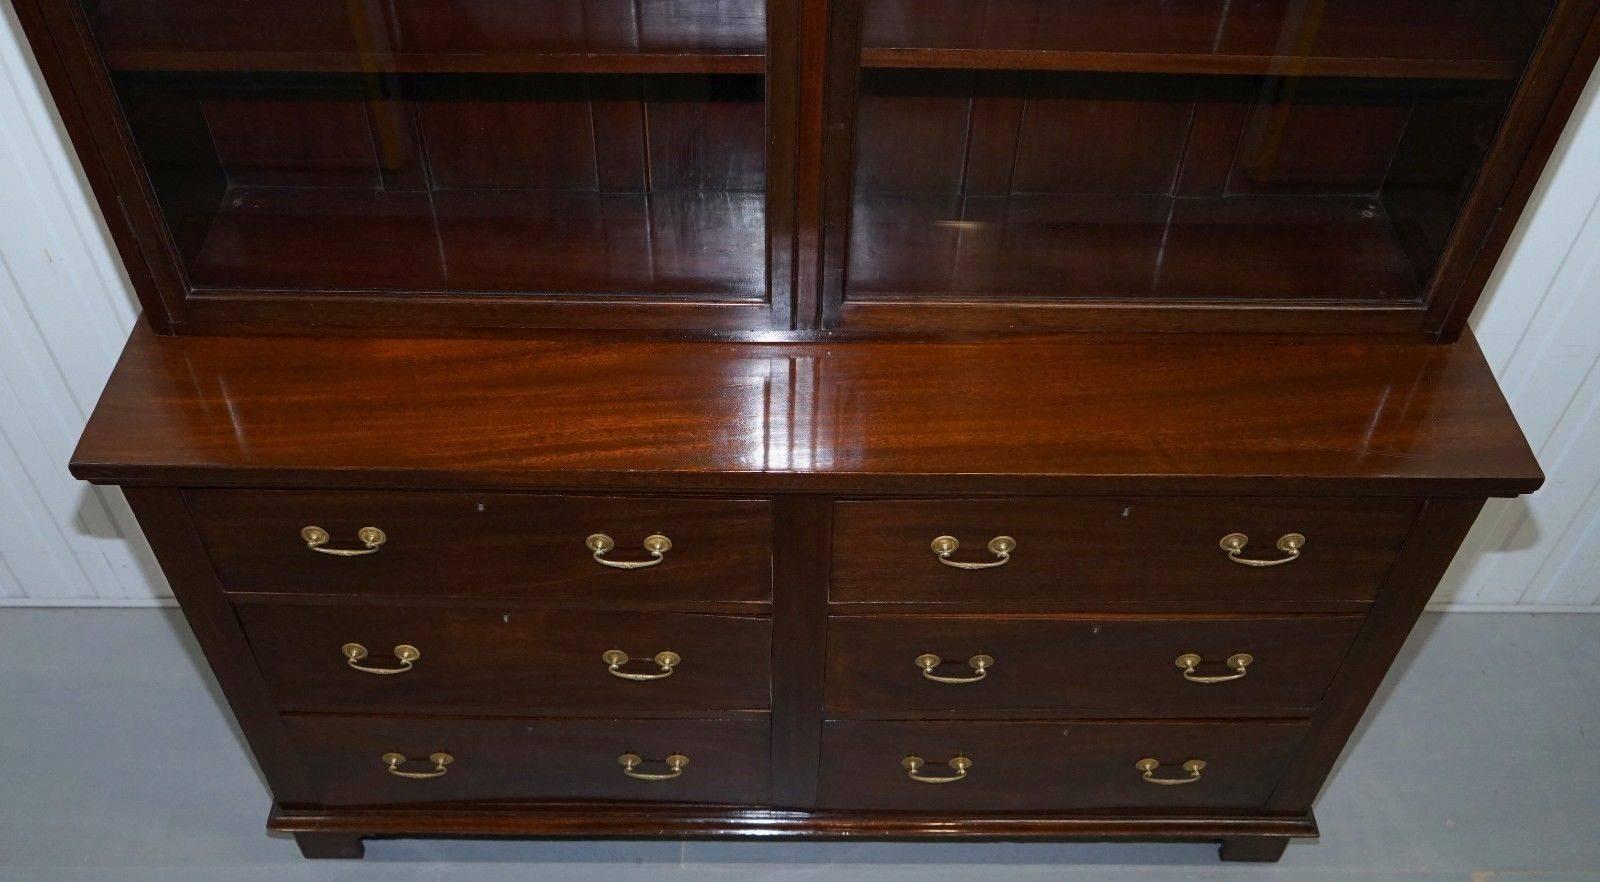 19th Century Late Georgian Early Victorian Mahogany Library Bookcase Dresser Cabinet Drawers